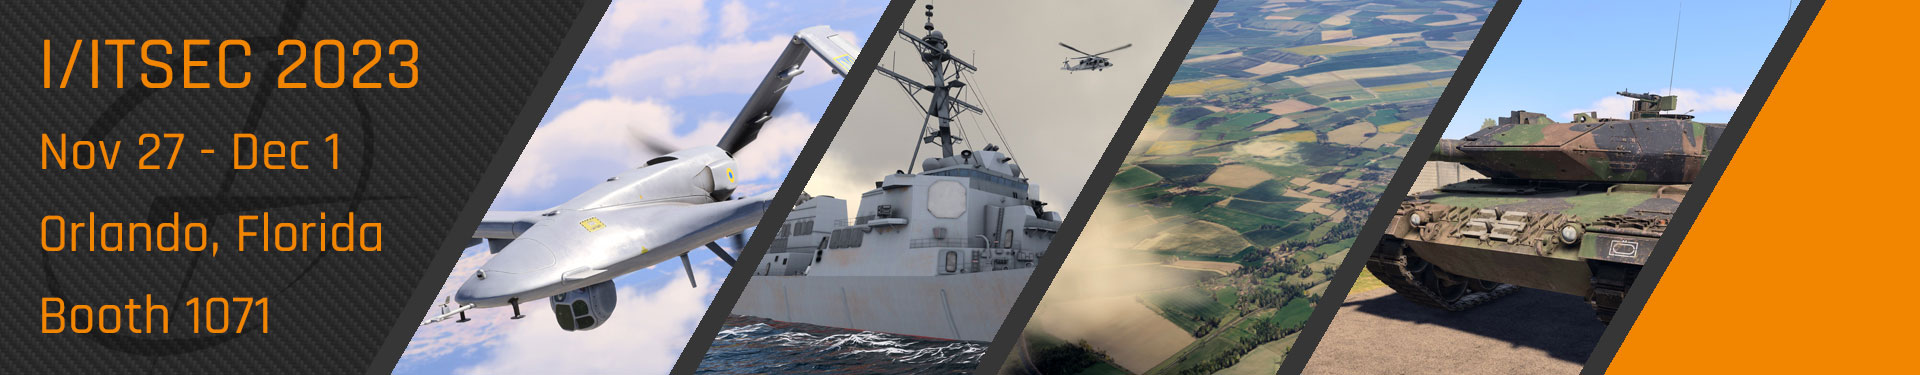 bisims_flagship_vbs4_combined_arms_demonstrations_at_iitsec_2023